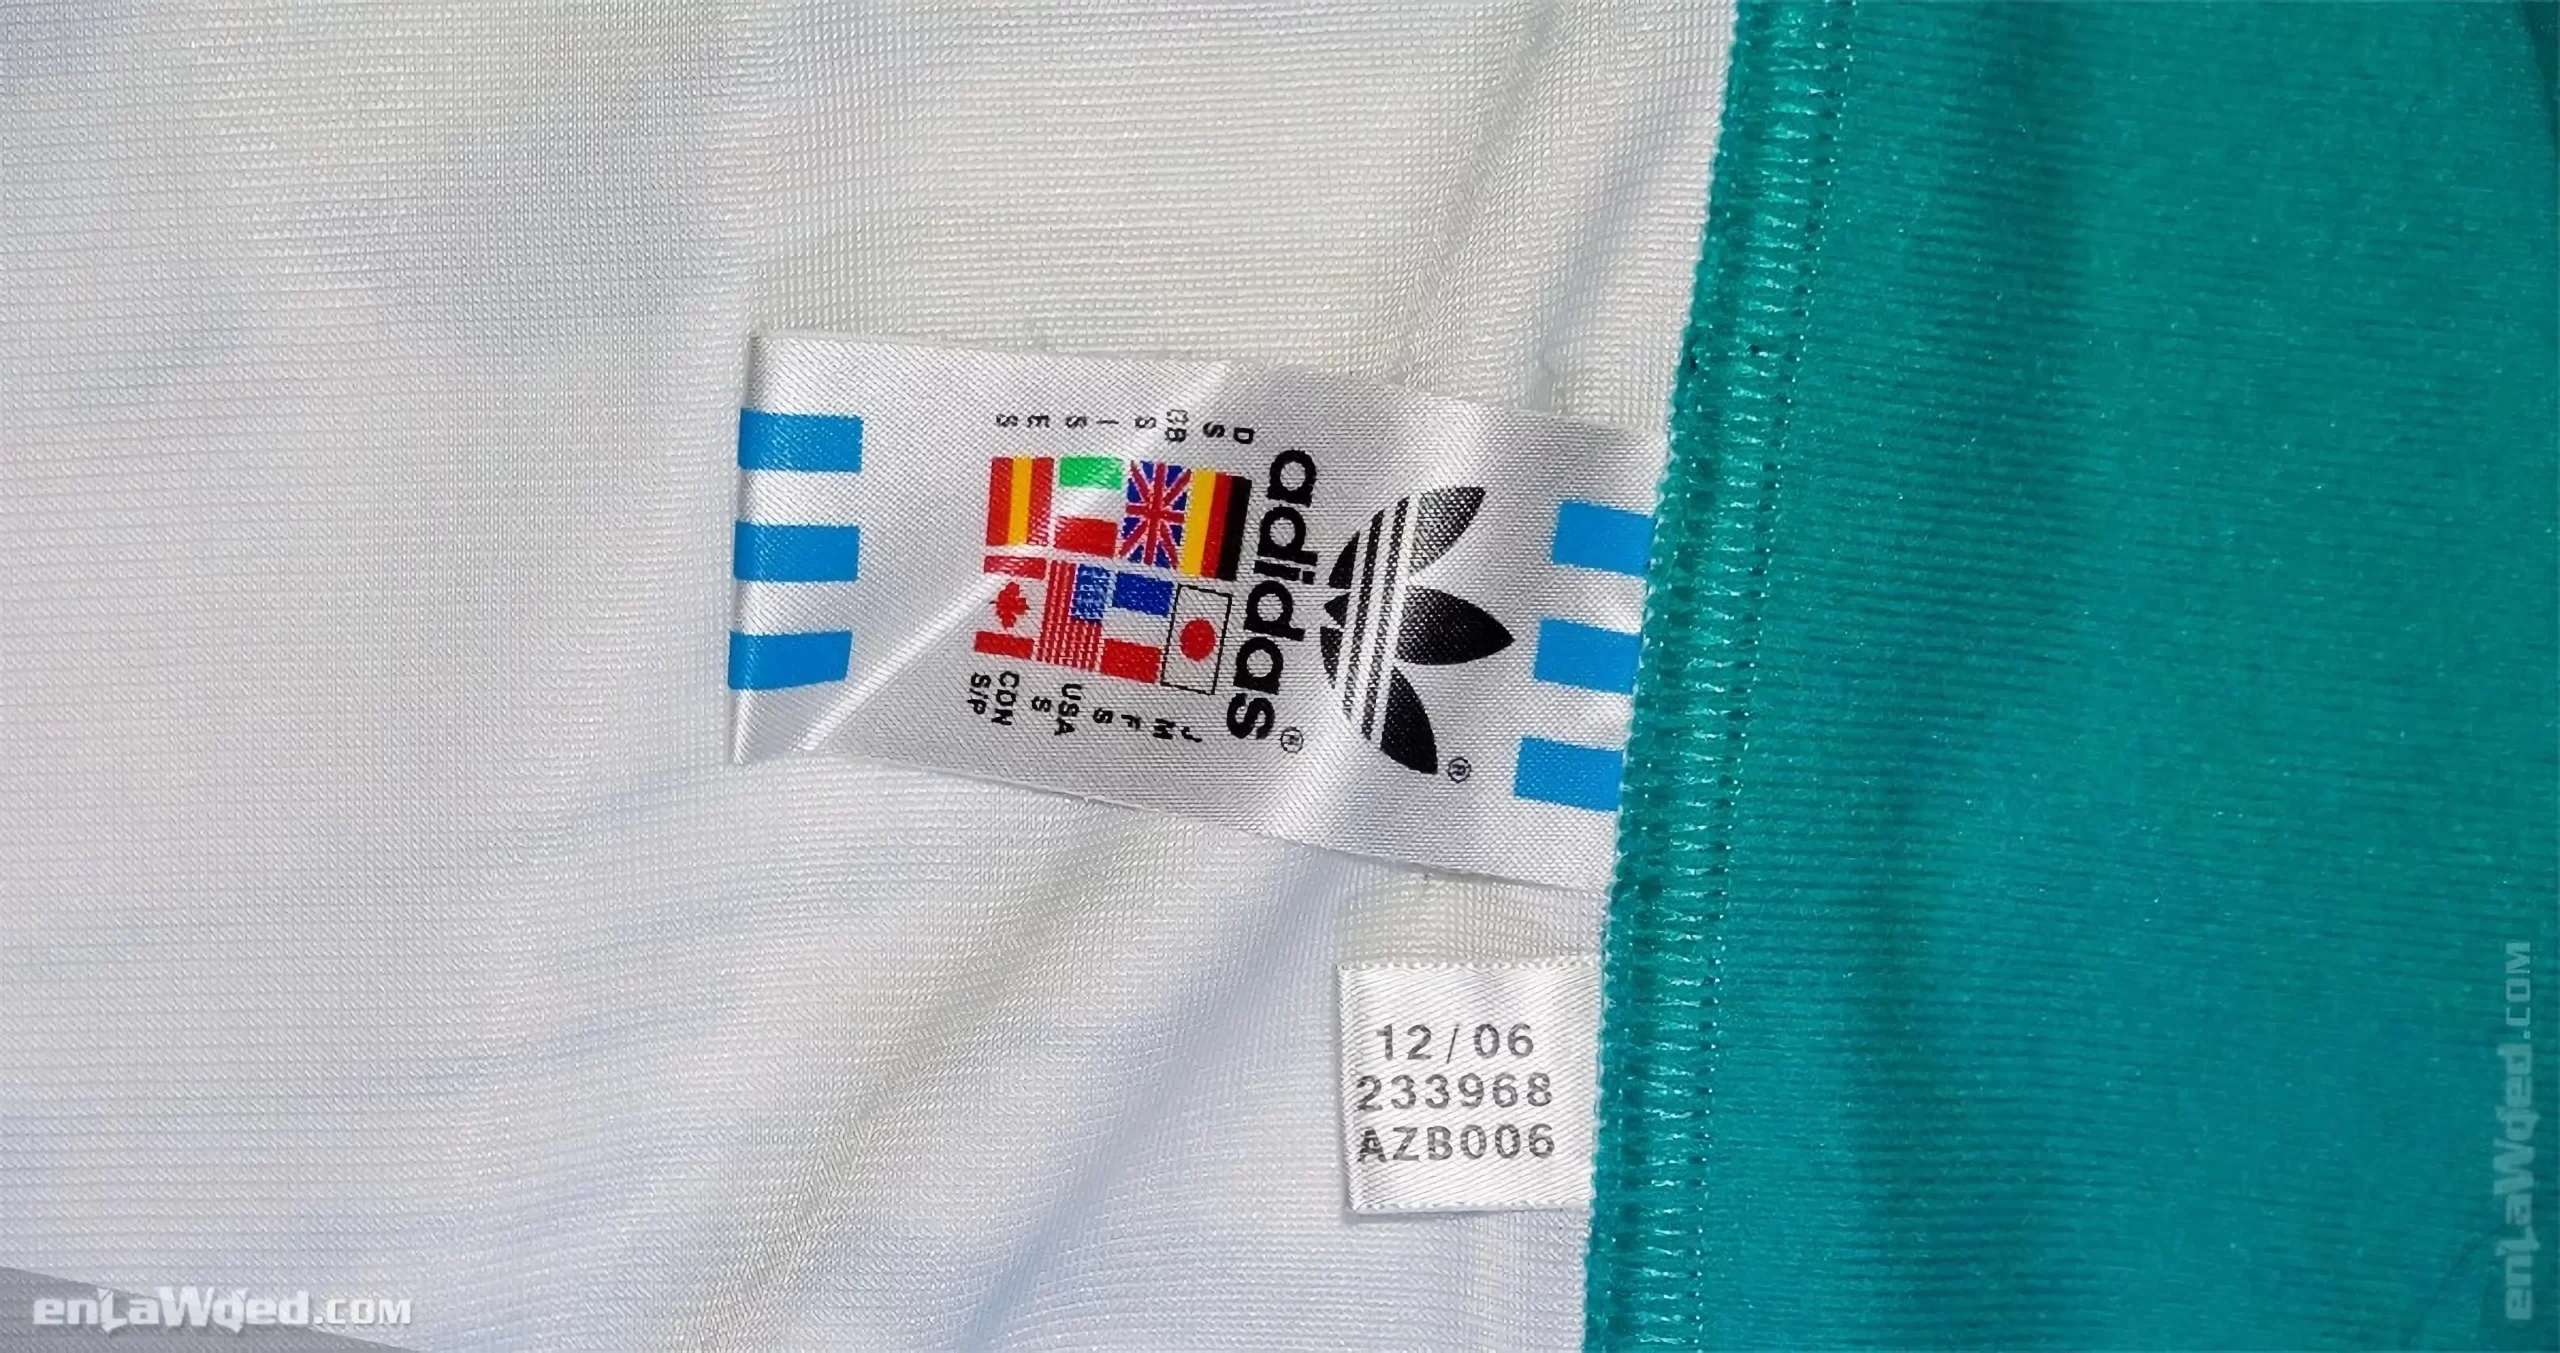 Adidas tag of the Miami jacket, with the month and year of fabrication: 12/2006